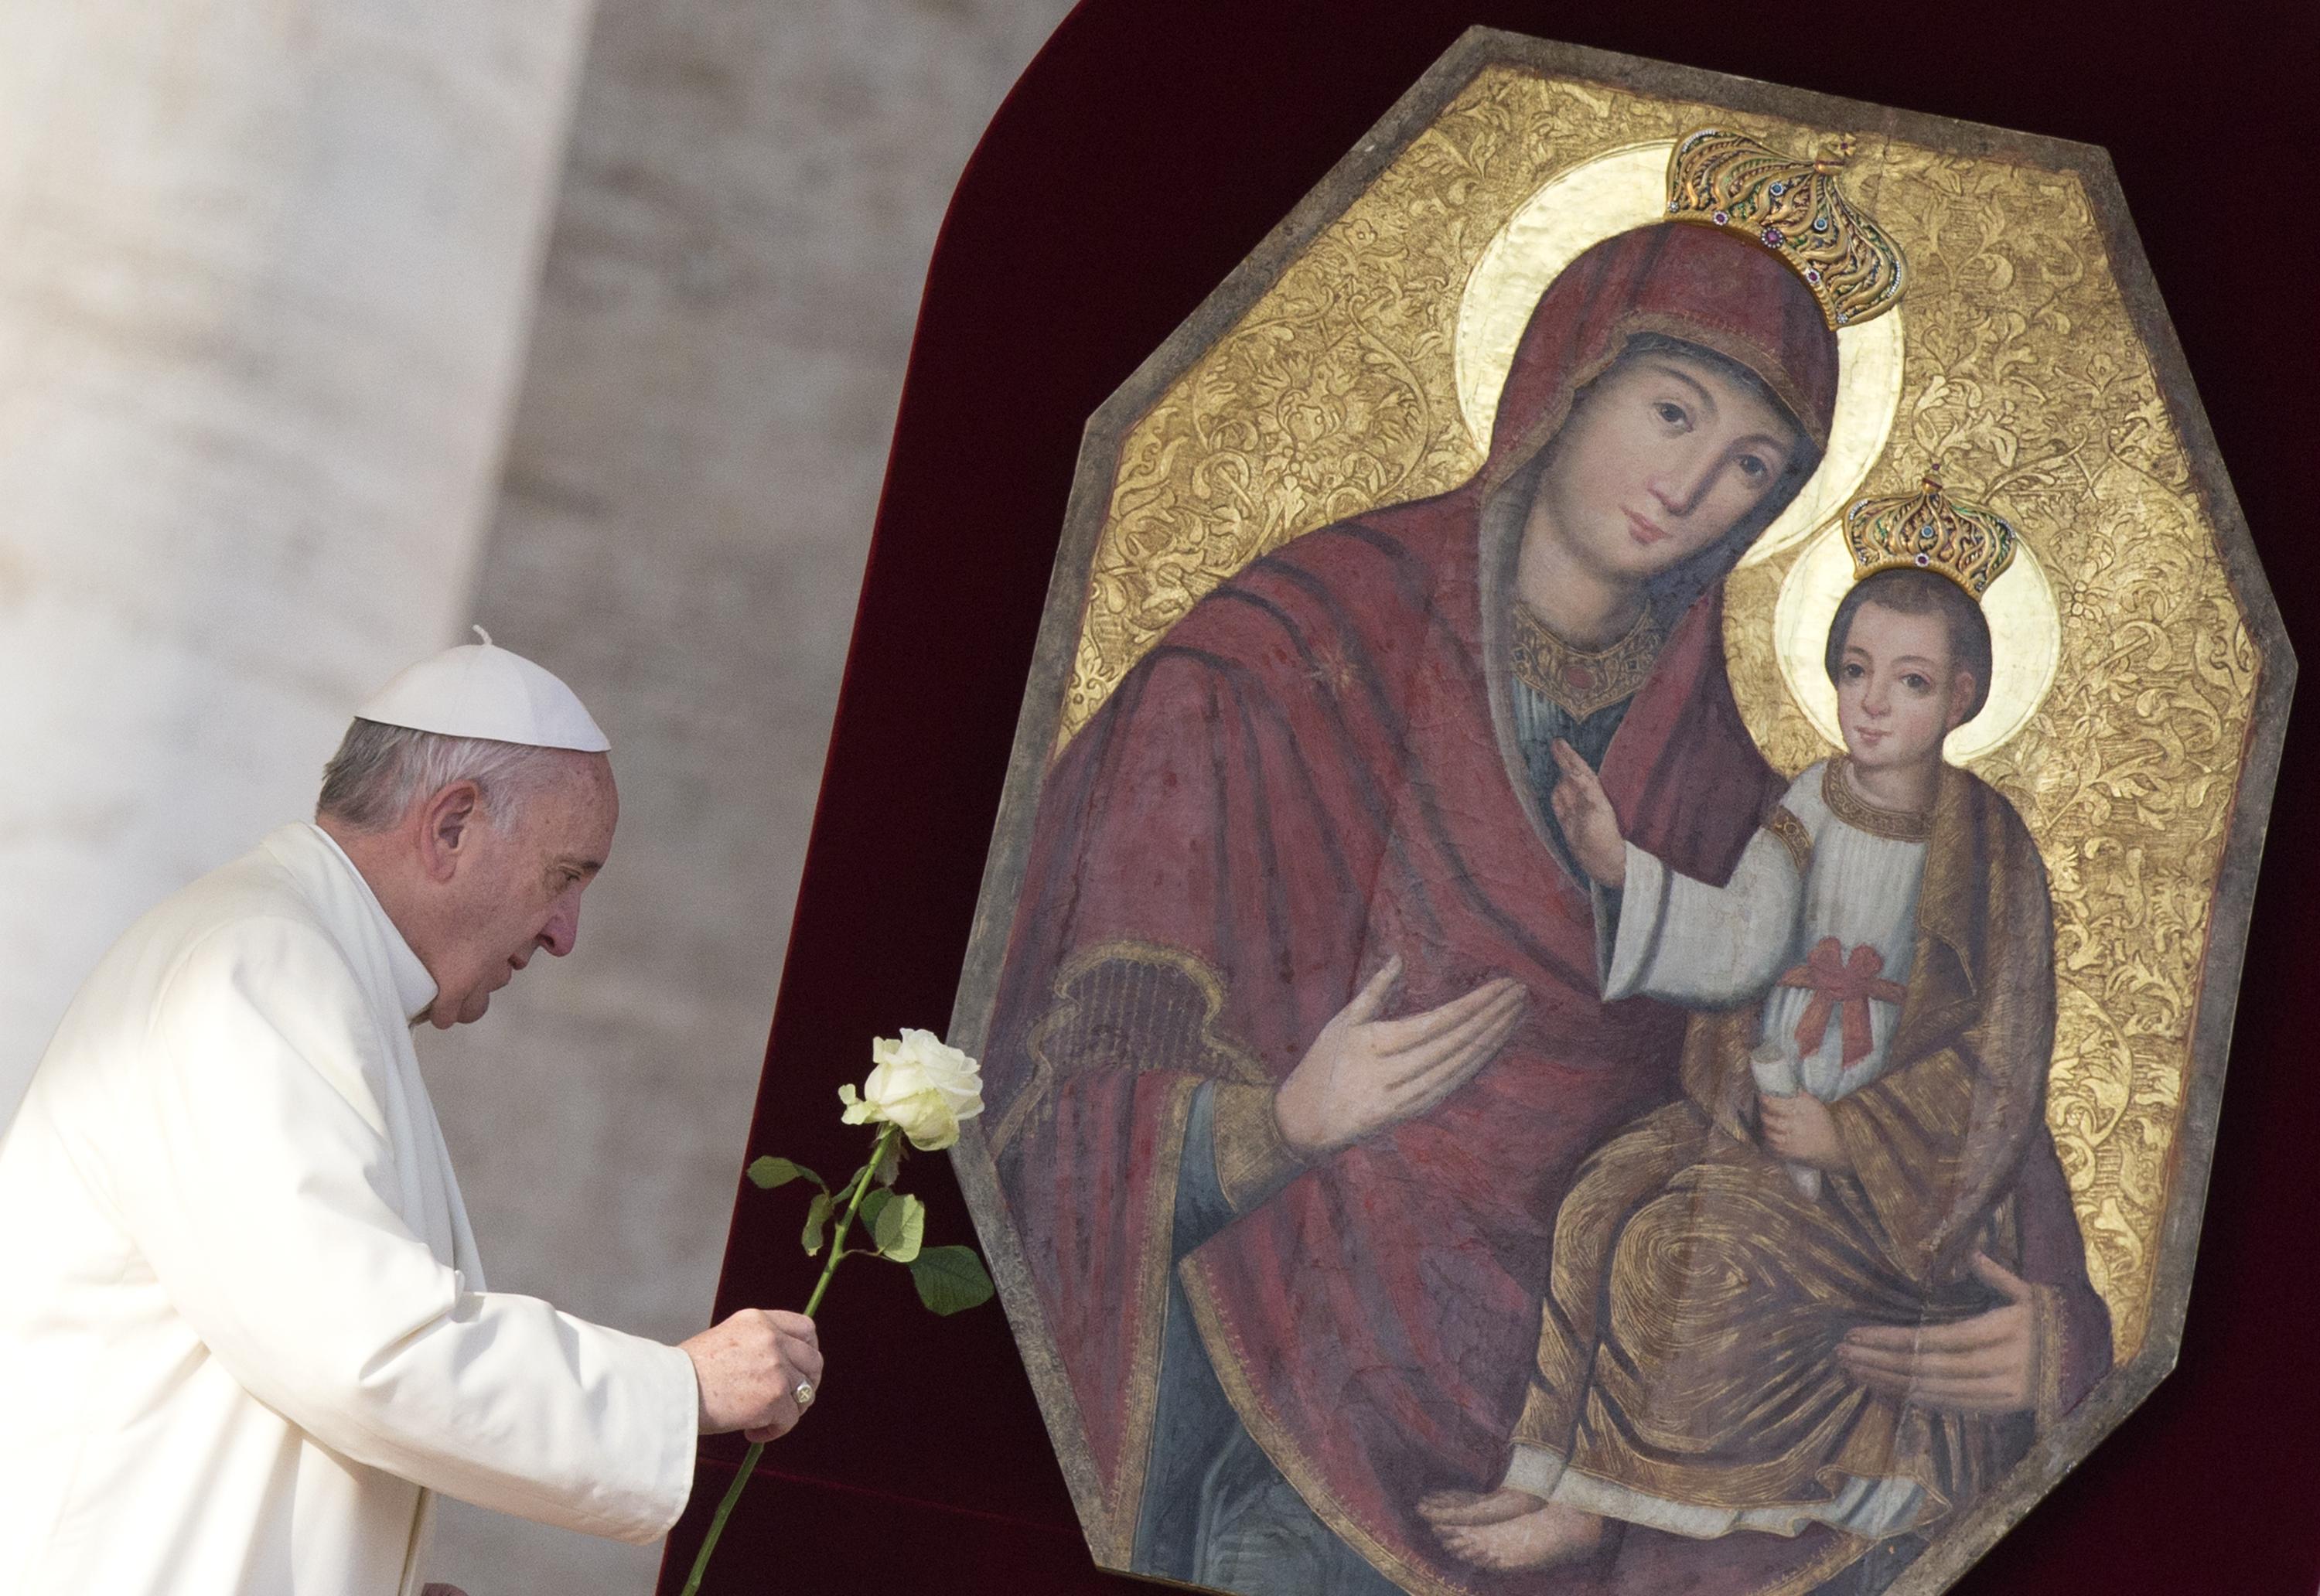 Pope Francis presents a rose at image of Holy Mary and Child Jesus prior his Wednesday General Audience